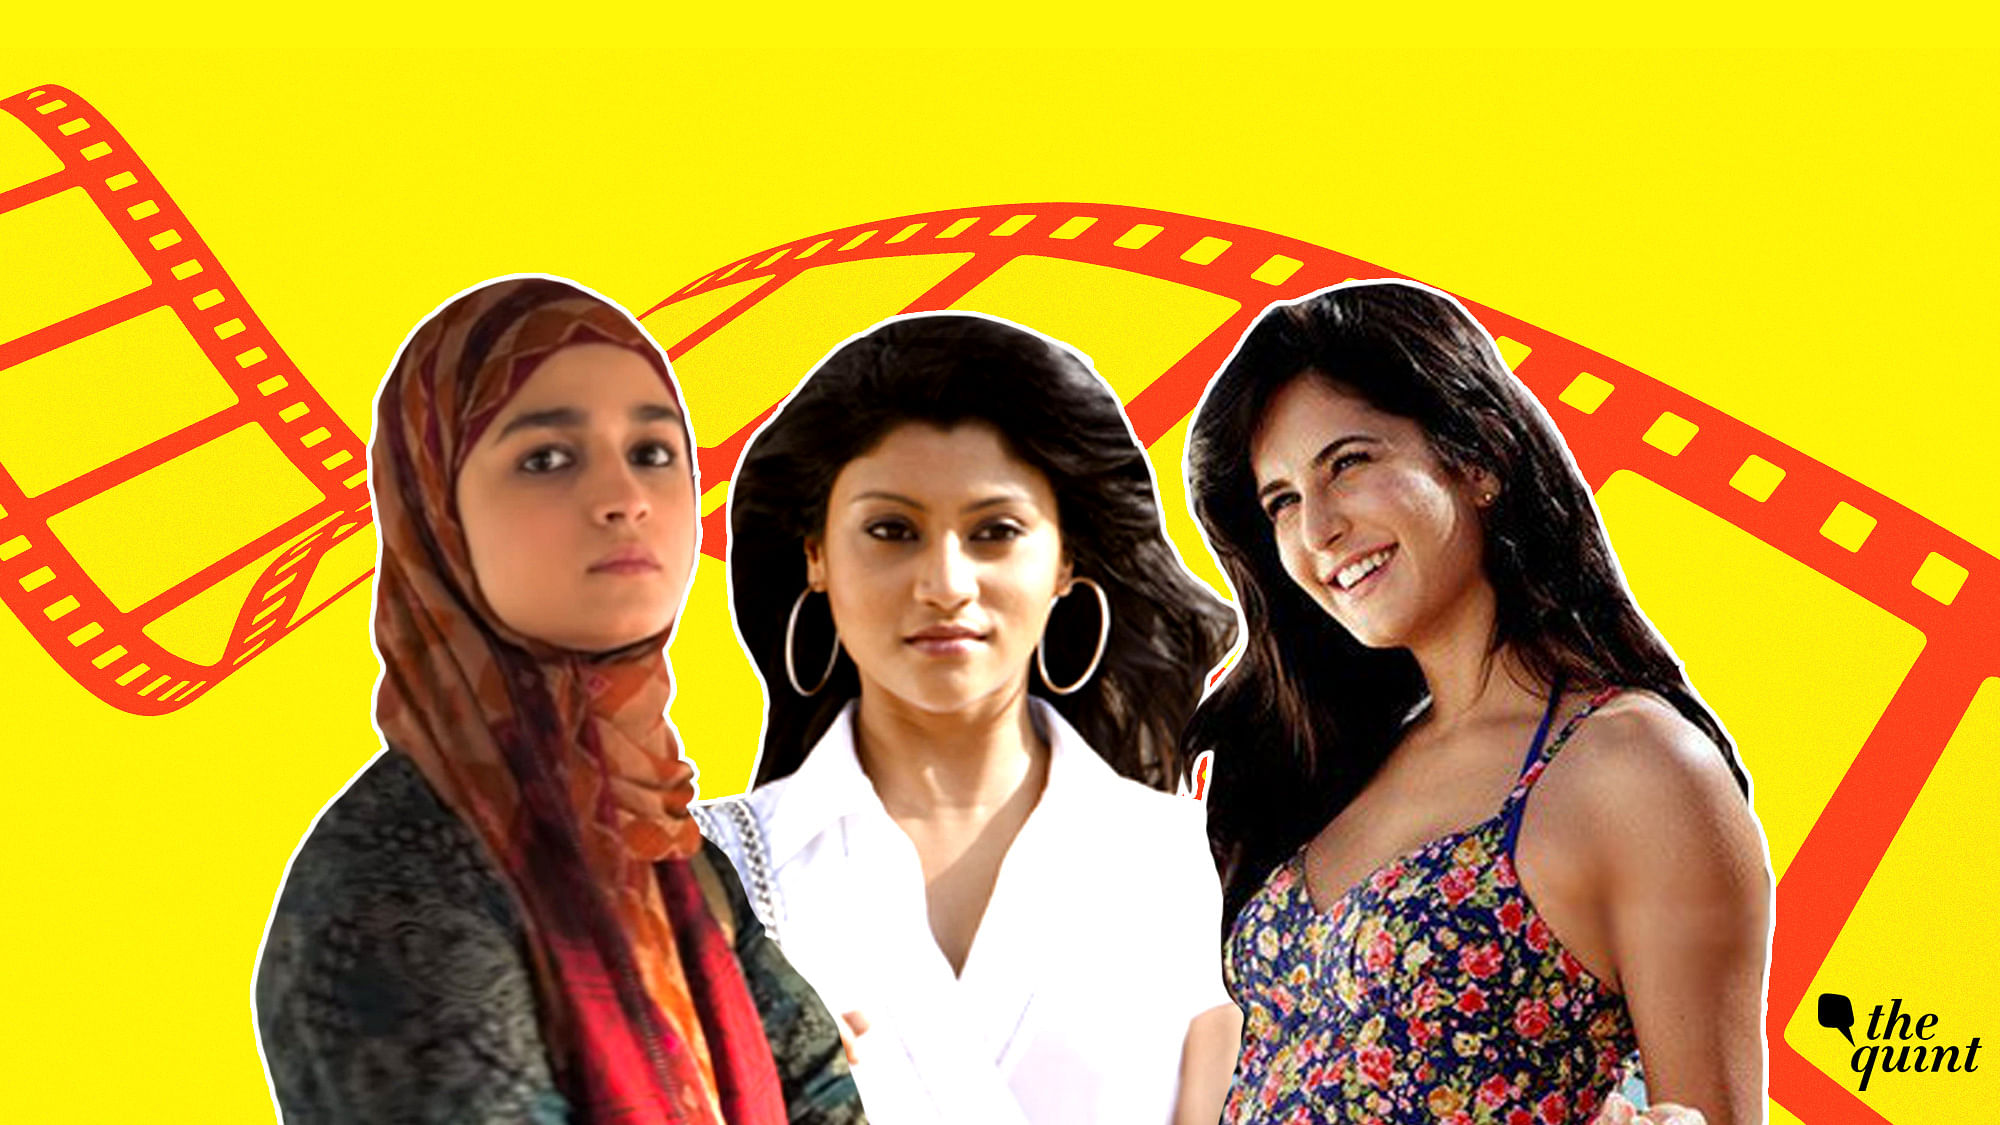 Zoya Akhtar has given us some interesting female characters.